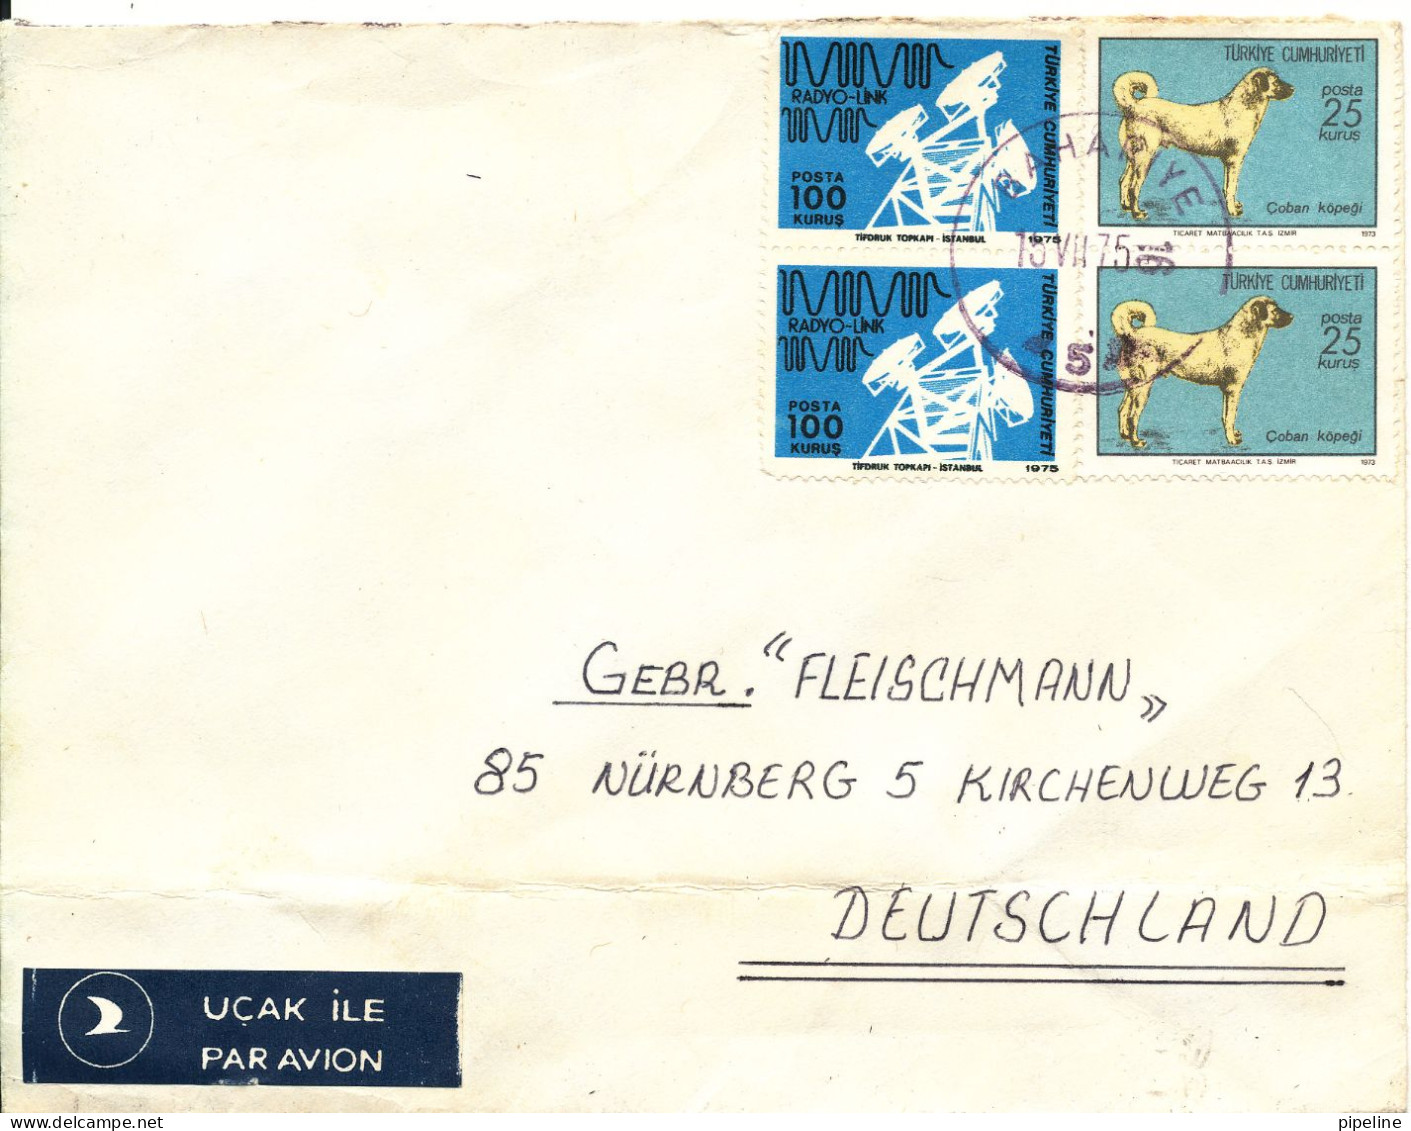 Turkey Cover Sent Air Mail To Germany 15-7-1975 (the Cover Is Folded At The Bottom) - Lettres & Documents